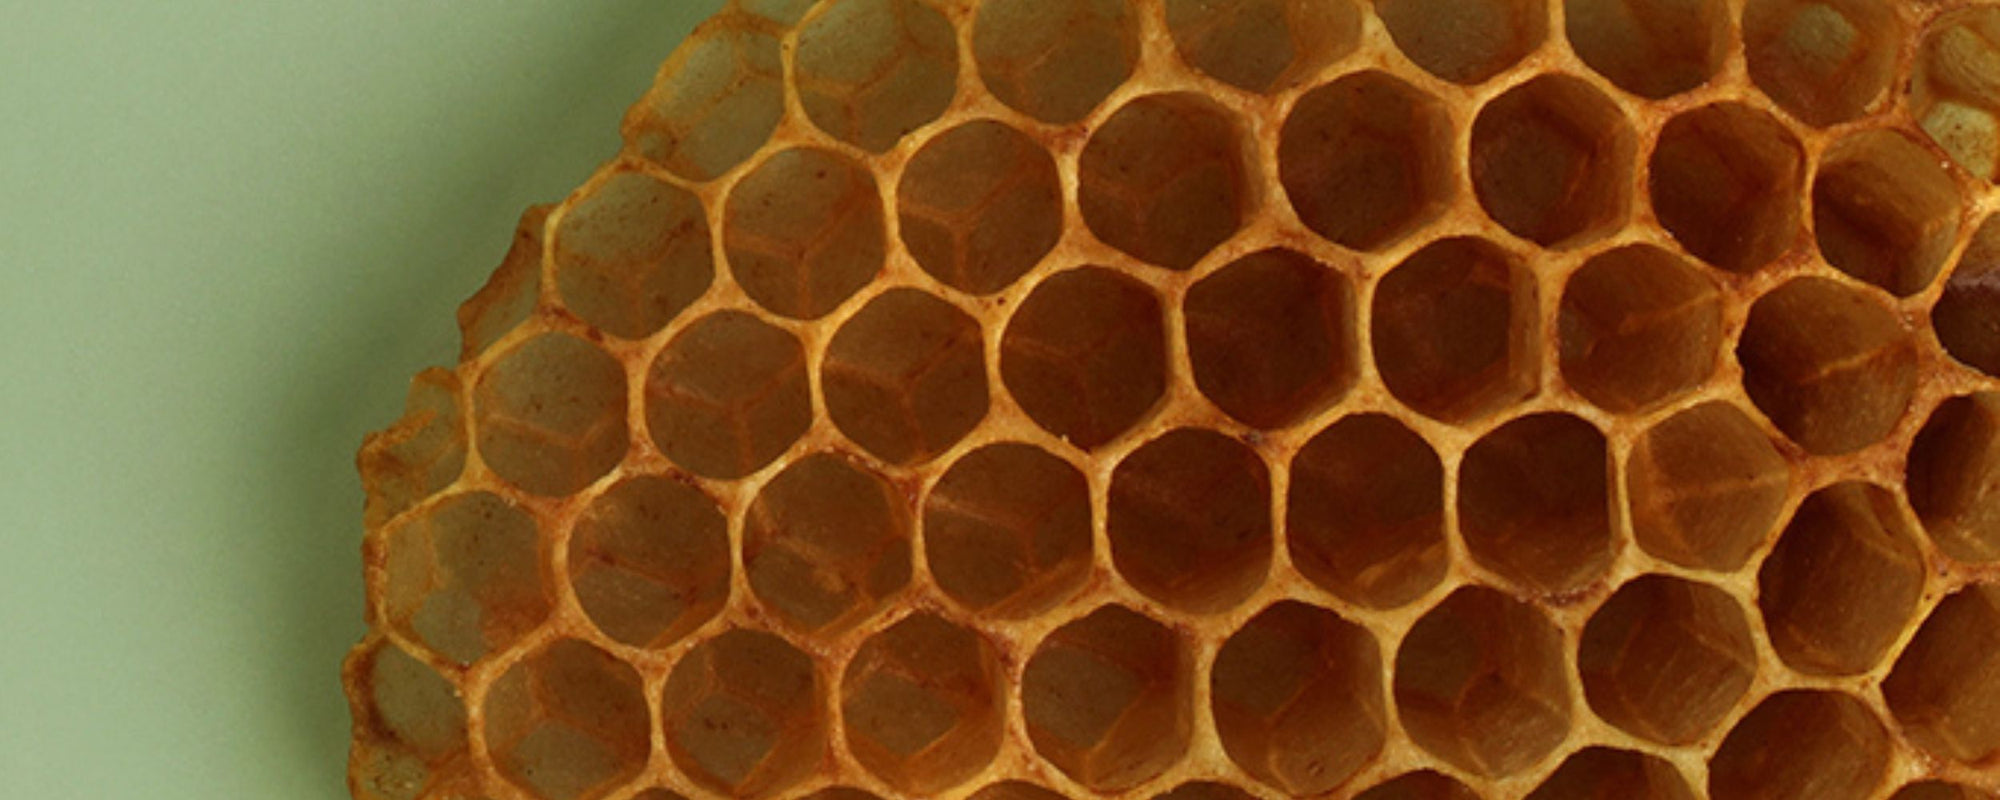 How to Render Wax From Honeycomb